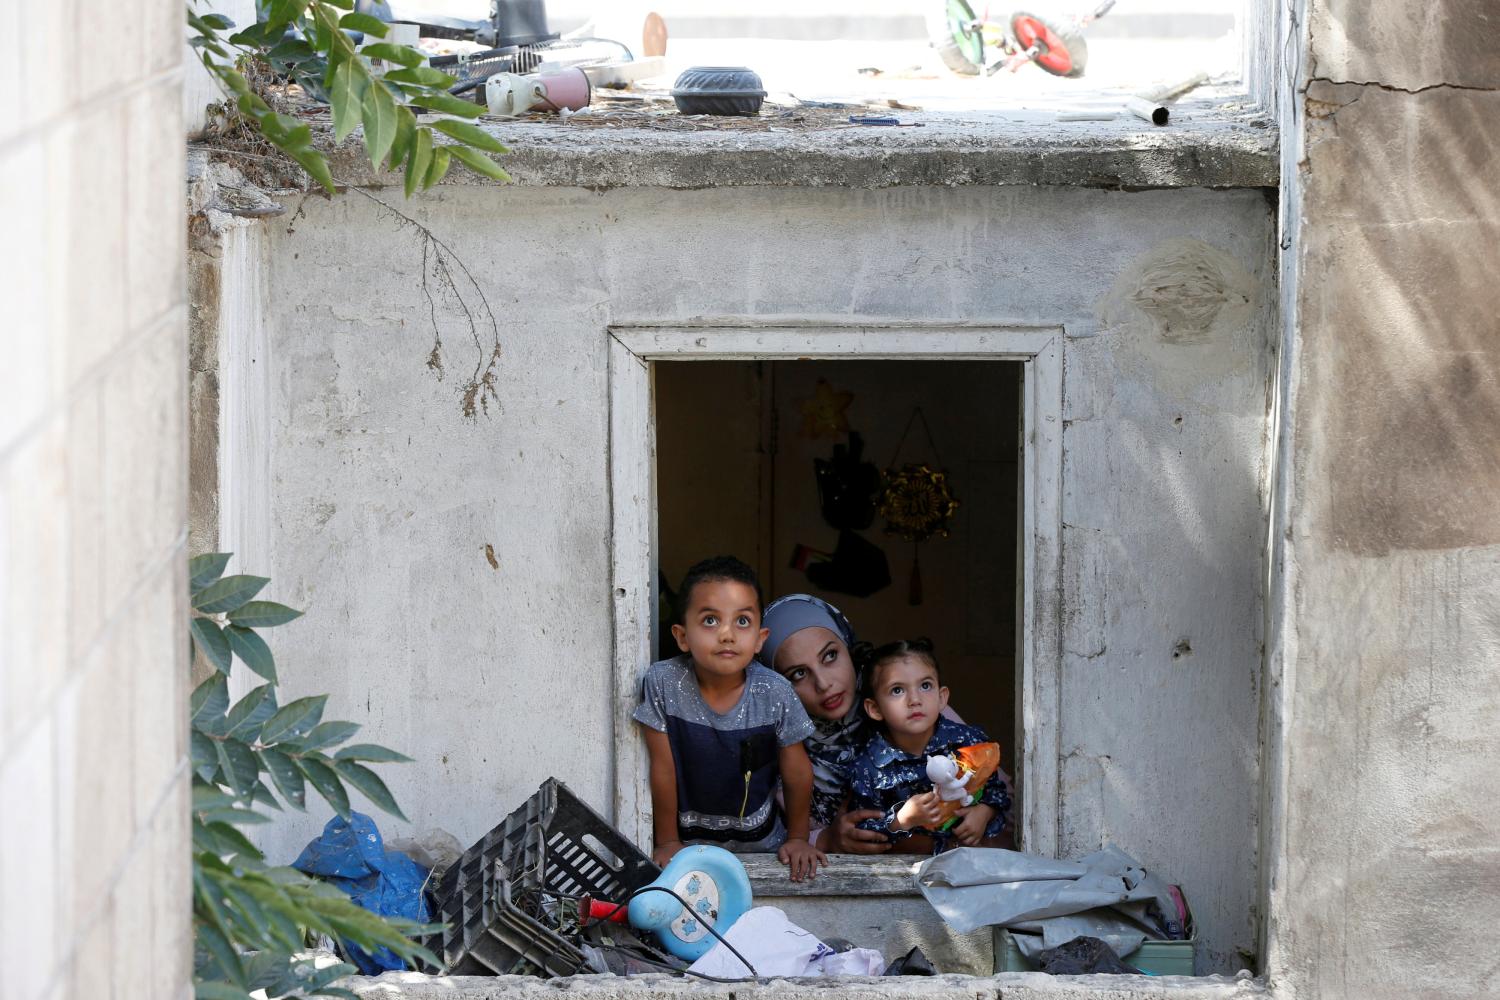 27-year-old Syrian refugee Alaa Masalmeh and her children, 5-year-old Samer and 3-year-old Mieral, look out of their home's window in Amman, Jordan, August 1, 2018. Picture taken August 1, 2018. REUTERS/Muhammad Hamed - RC18B300D870